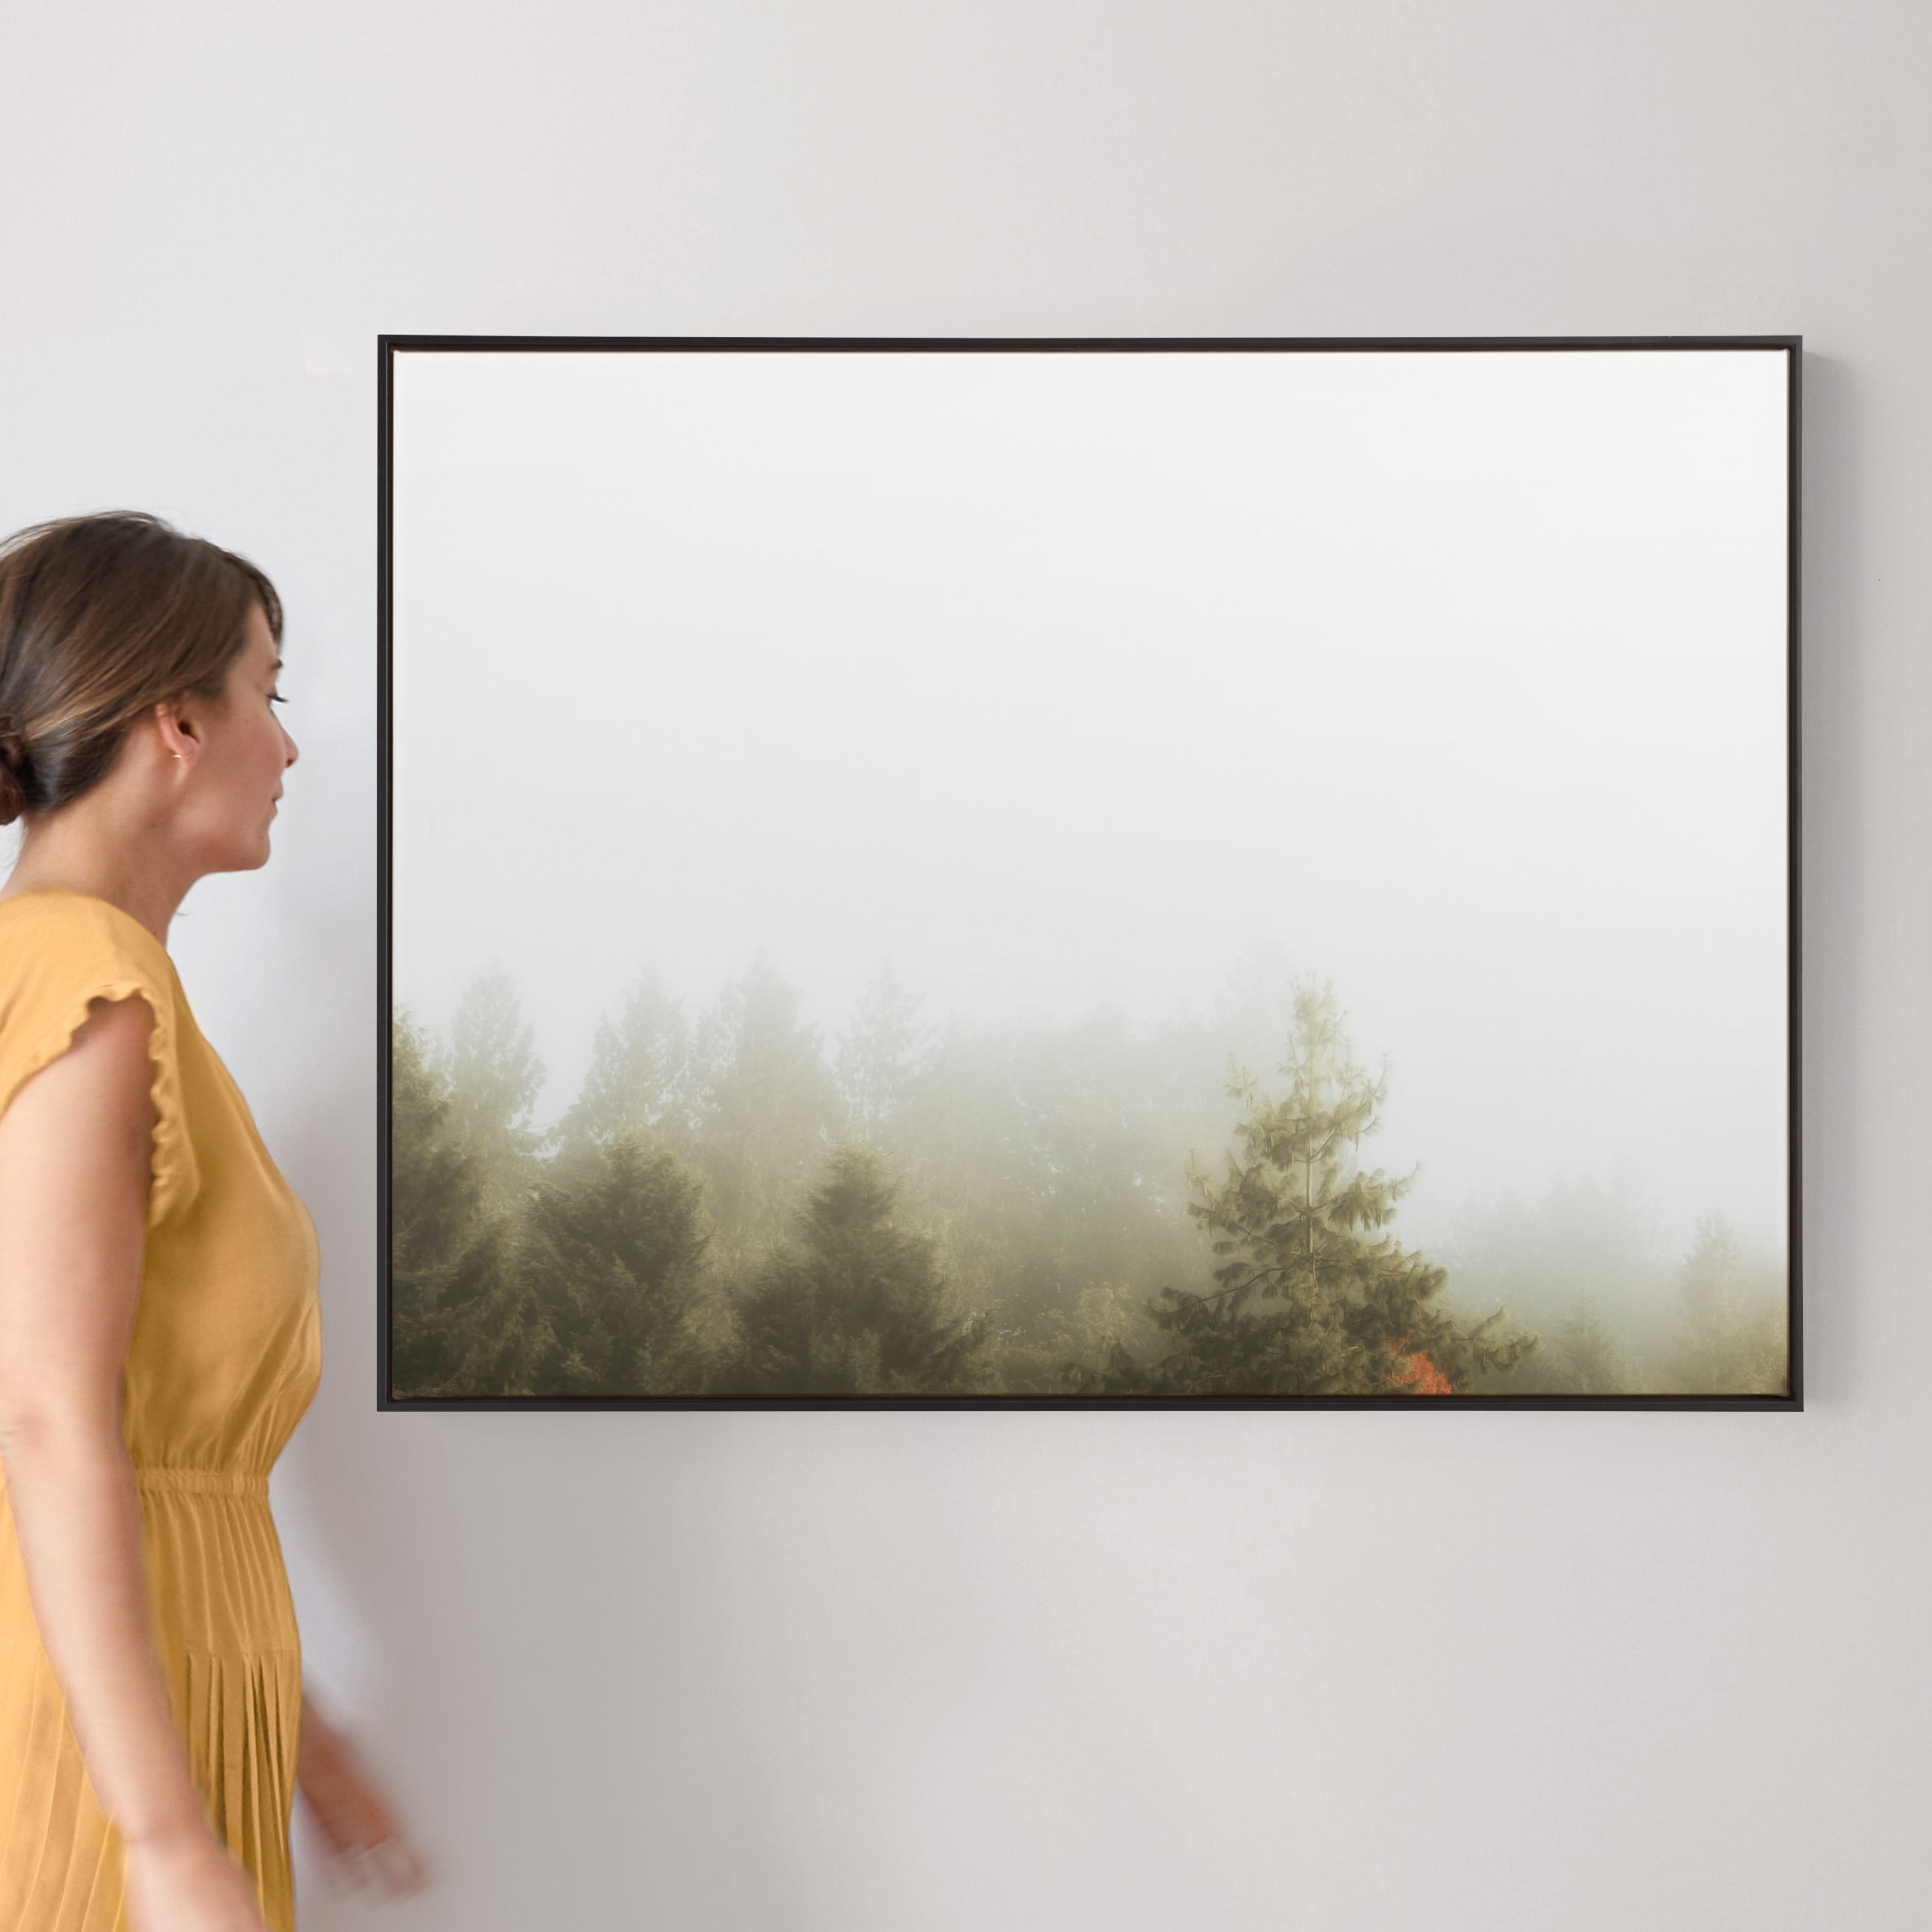 Foggy Autumn Forest Morning, 40 x 30, Canvas, Black Wood Frame, Gallery Wrap - Image 1